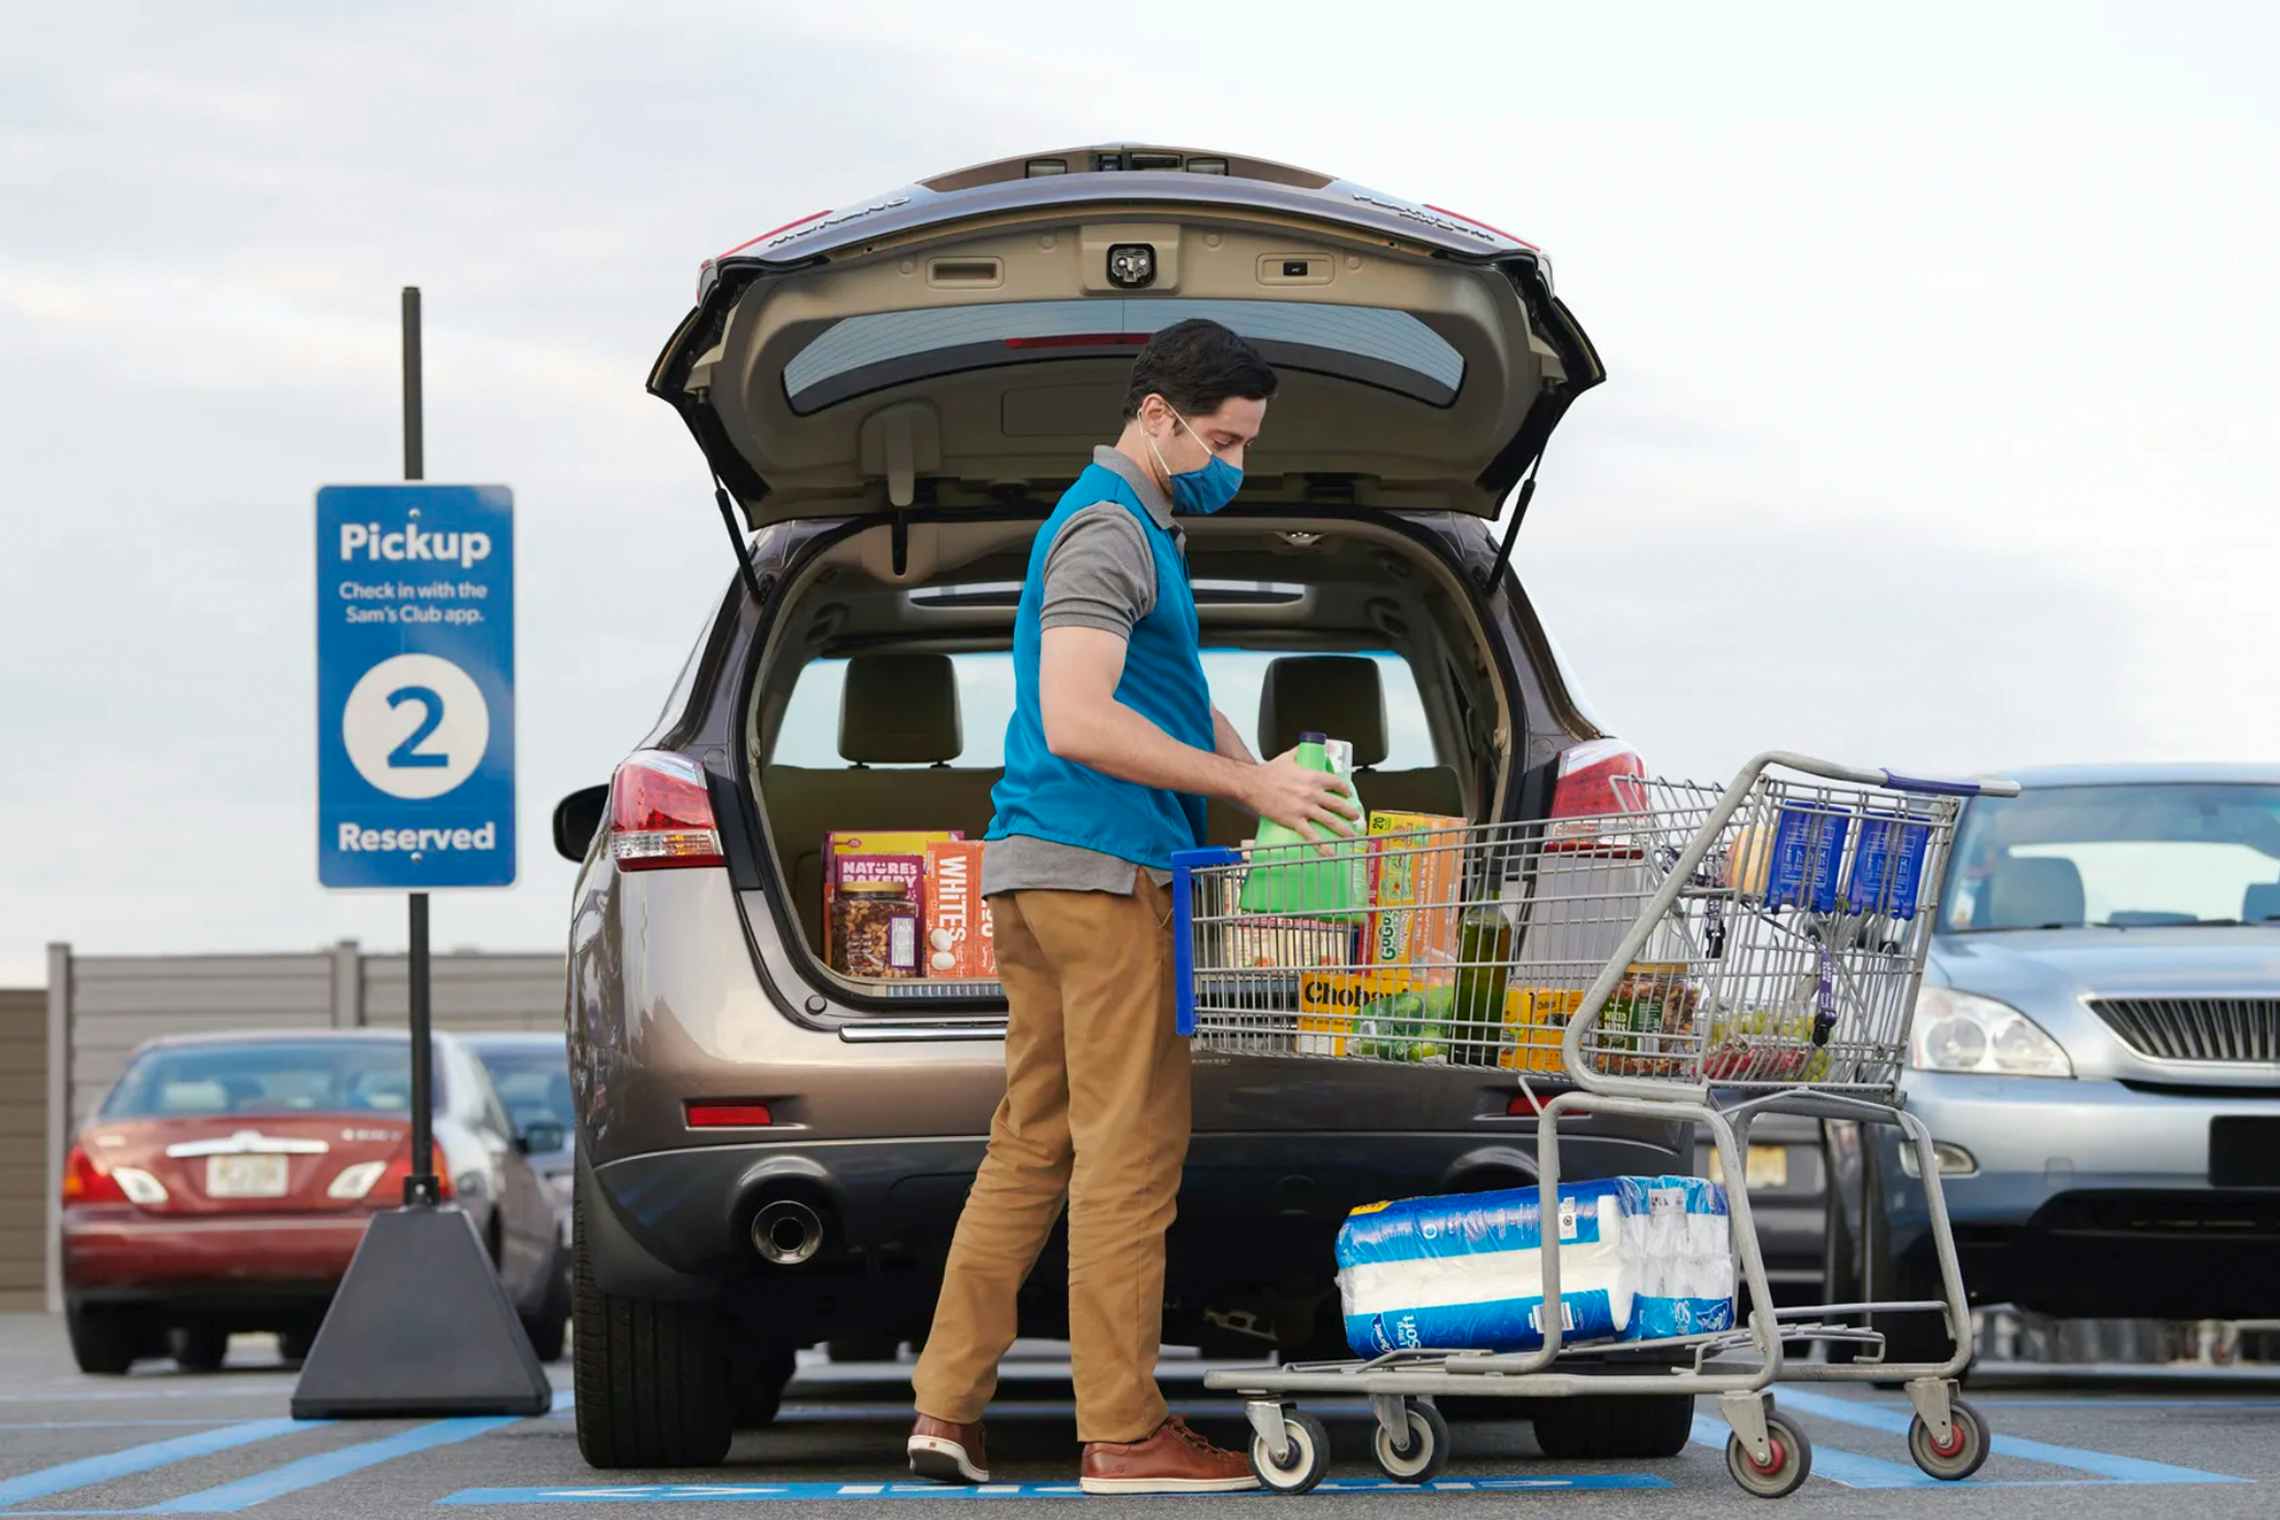 A Sam's Club employee putting groceries into the back of an SUV